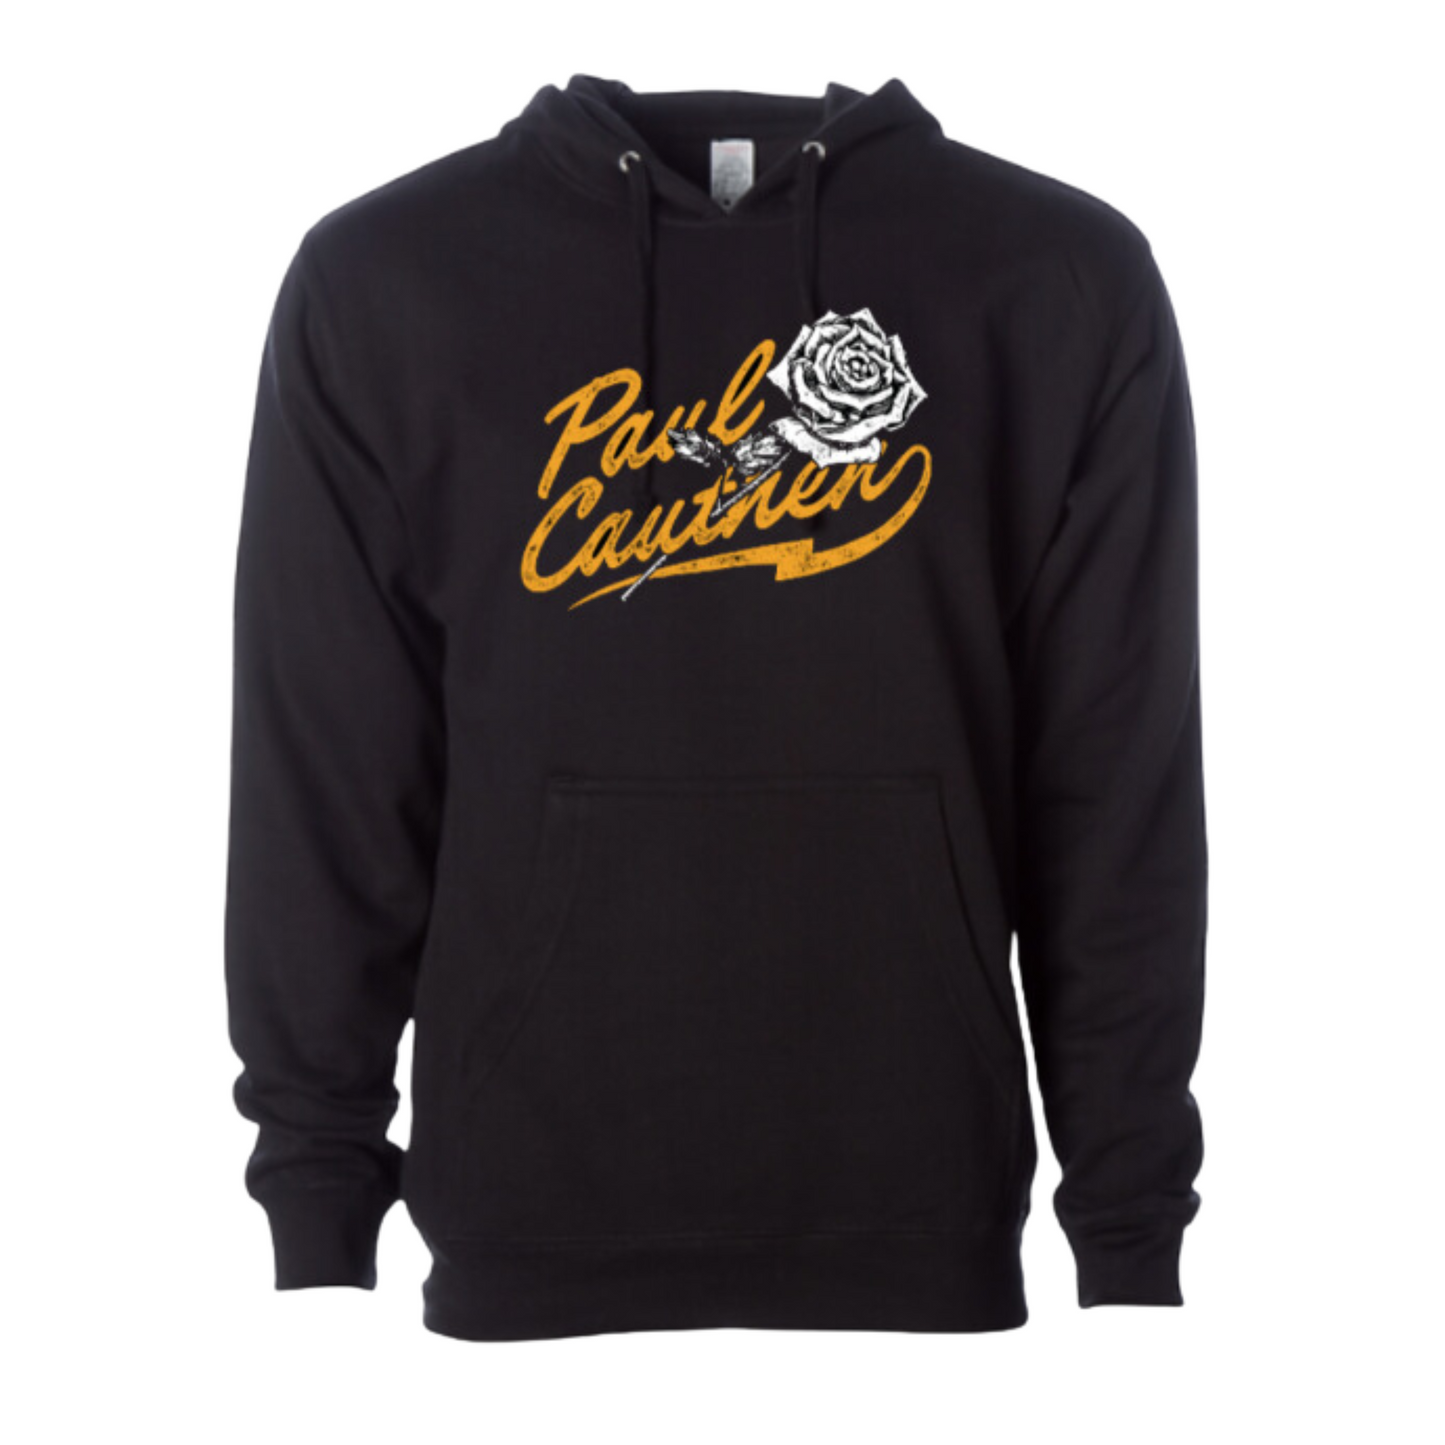 Paul Cauthen Gold Rose Hoodie